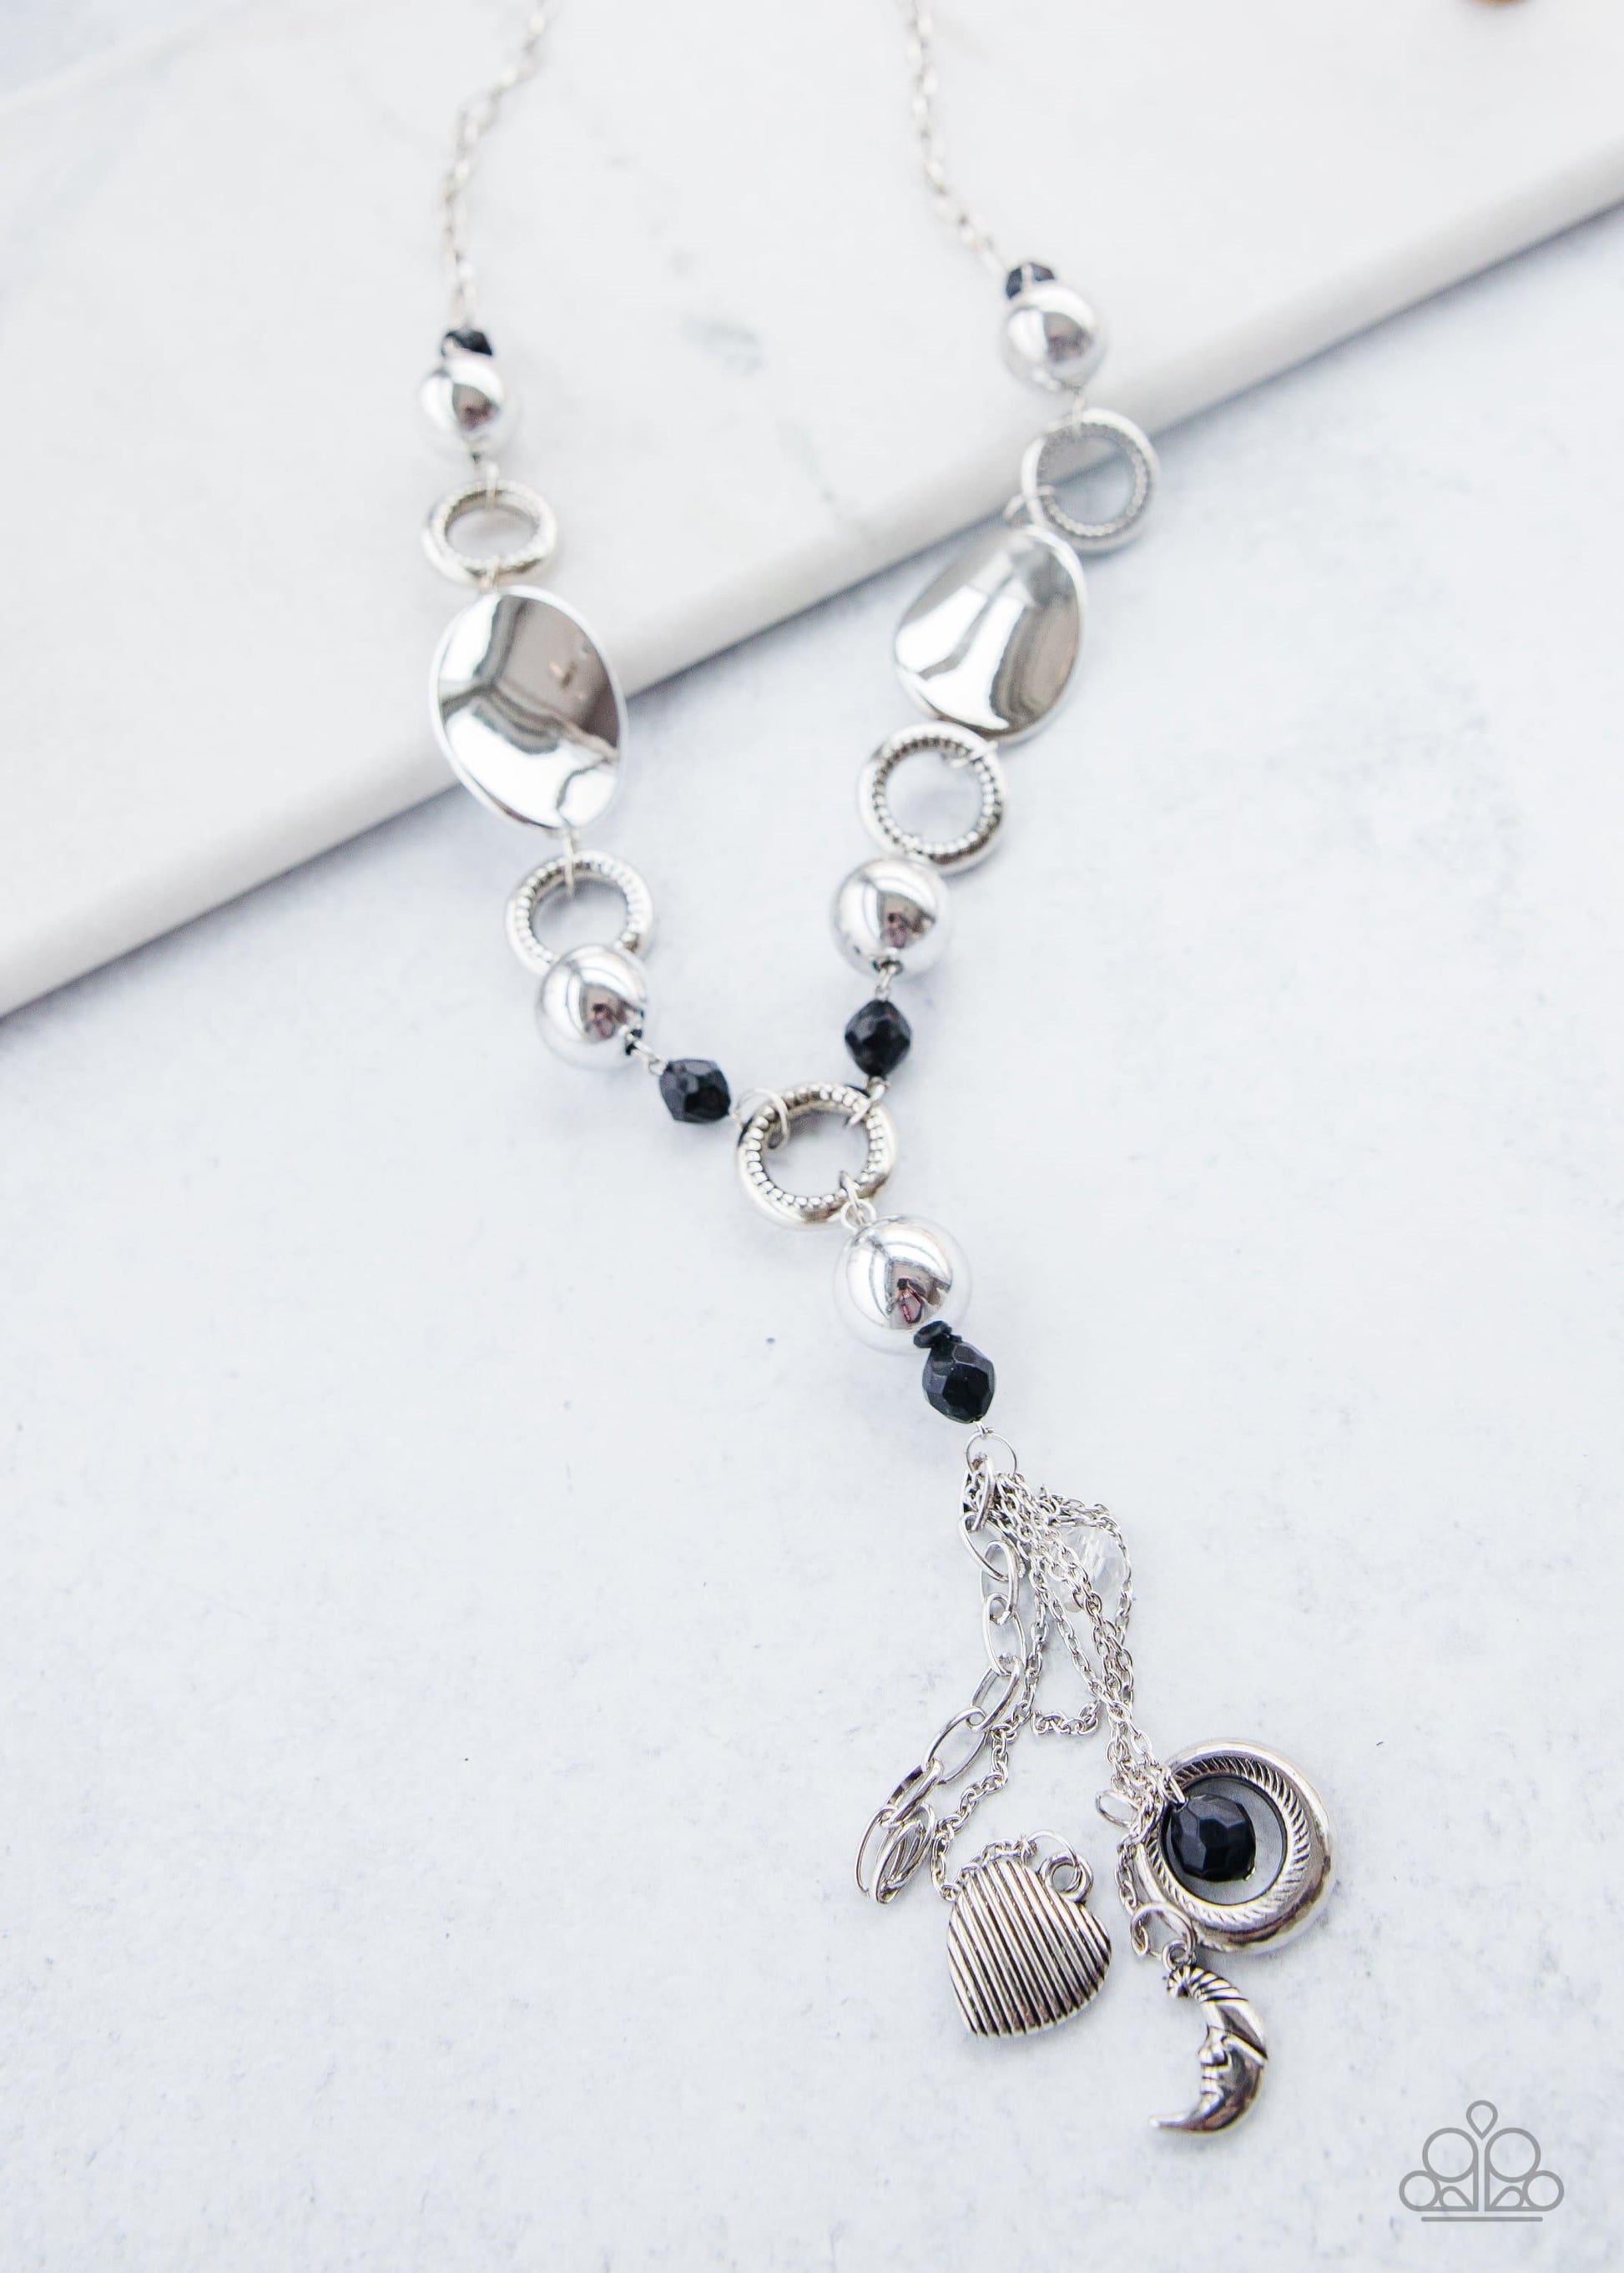 Paparazzi Accessories - Paparazzi Blockbuster Necklace: Total Eclipse Of The Heart - Bling by JessieK